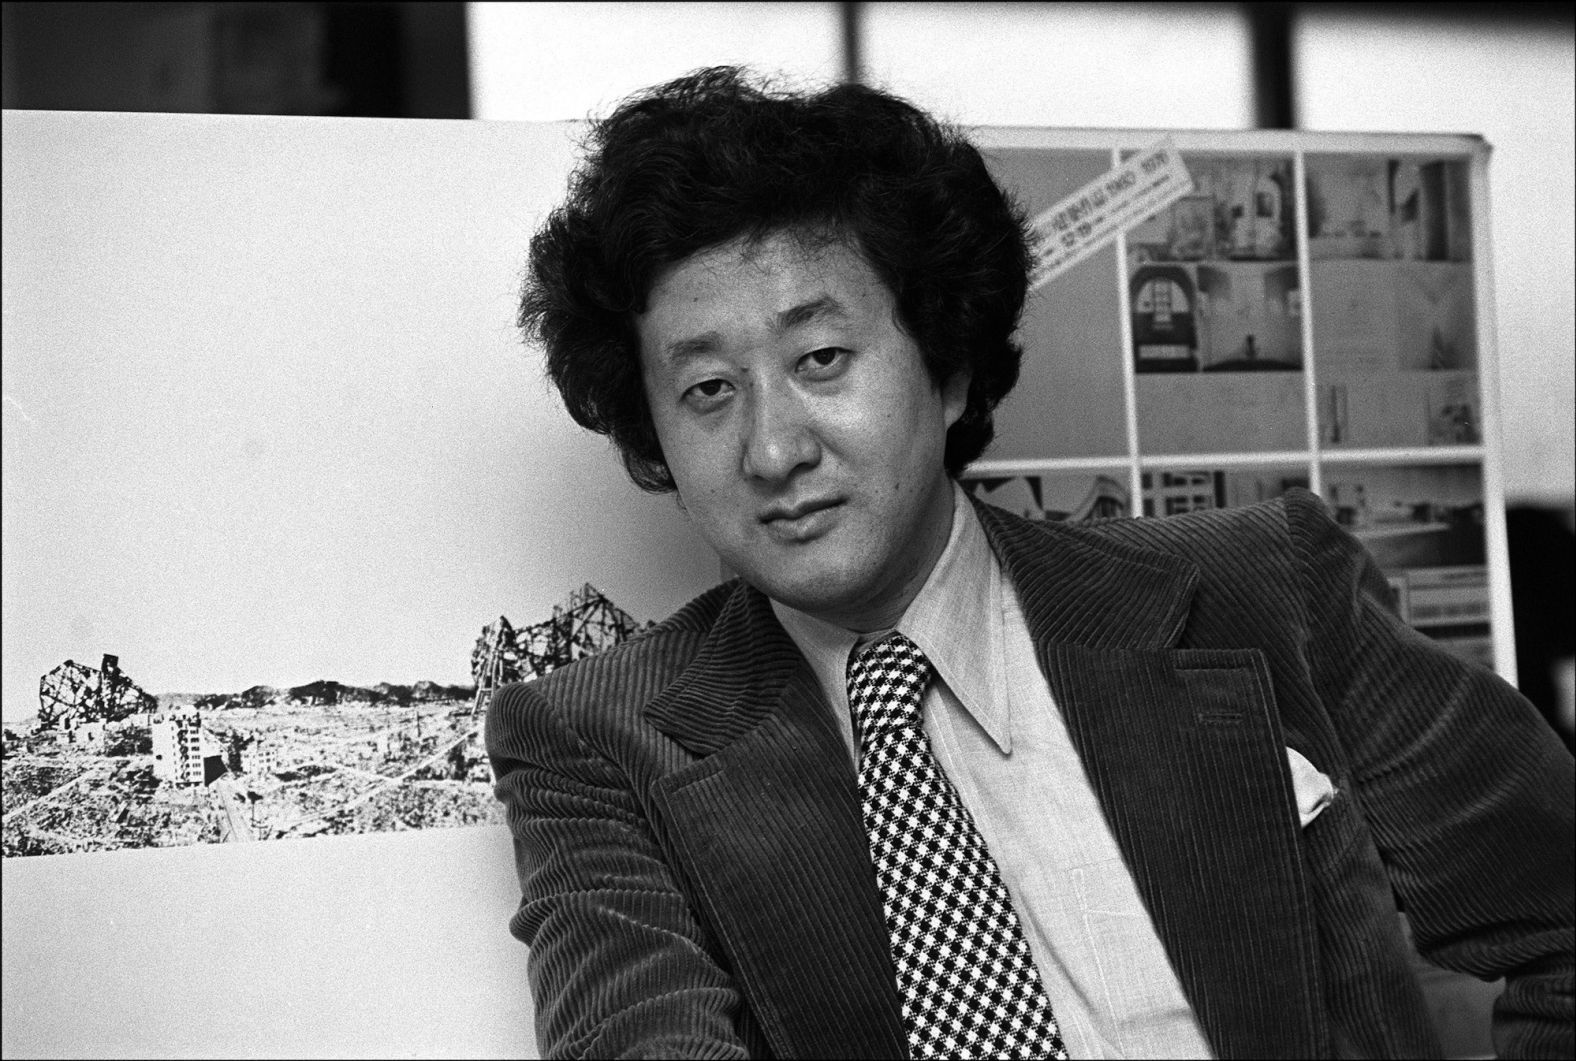 Renowned Japanese architect <a href="index.php?page=&url=https%3A%2F%2Fwww.cnn.com%2Fstyle%2Farticle%2Farata-isozaki-obituary%2Findex.html" target="_blank">Arata Isozaki</a> died Wednesday, December 28, at the age of 91, according to his longtime partner Misa Shin. Isozaki played a major role in postmodern architecture and won the Pritzker Prize in 2019.